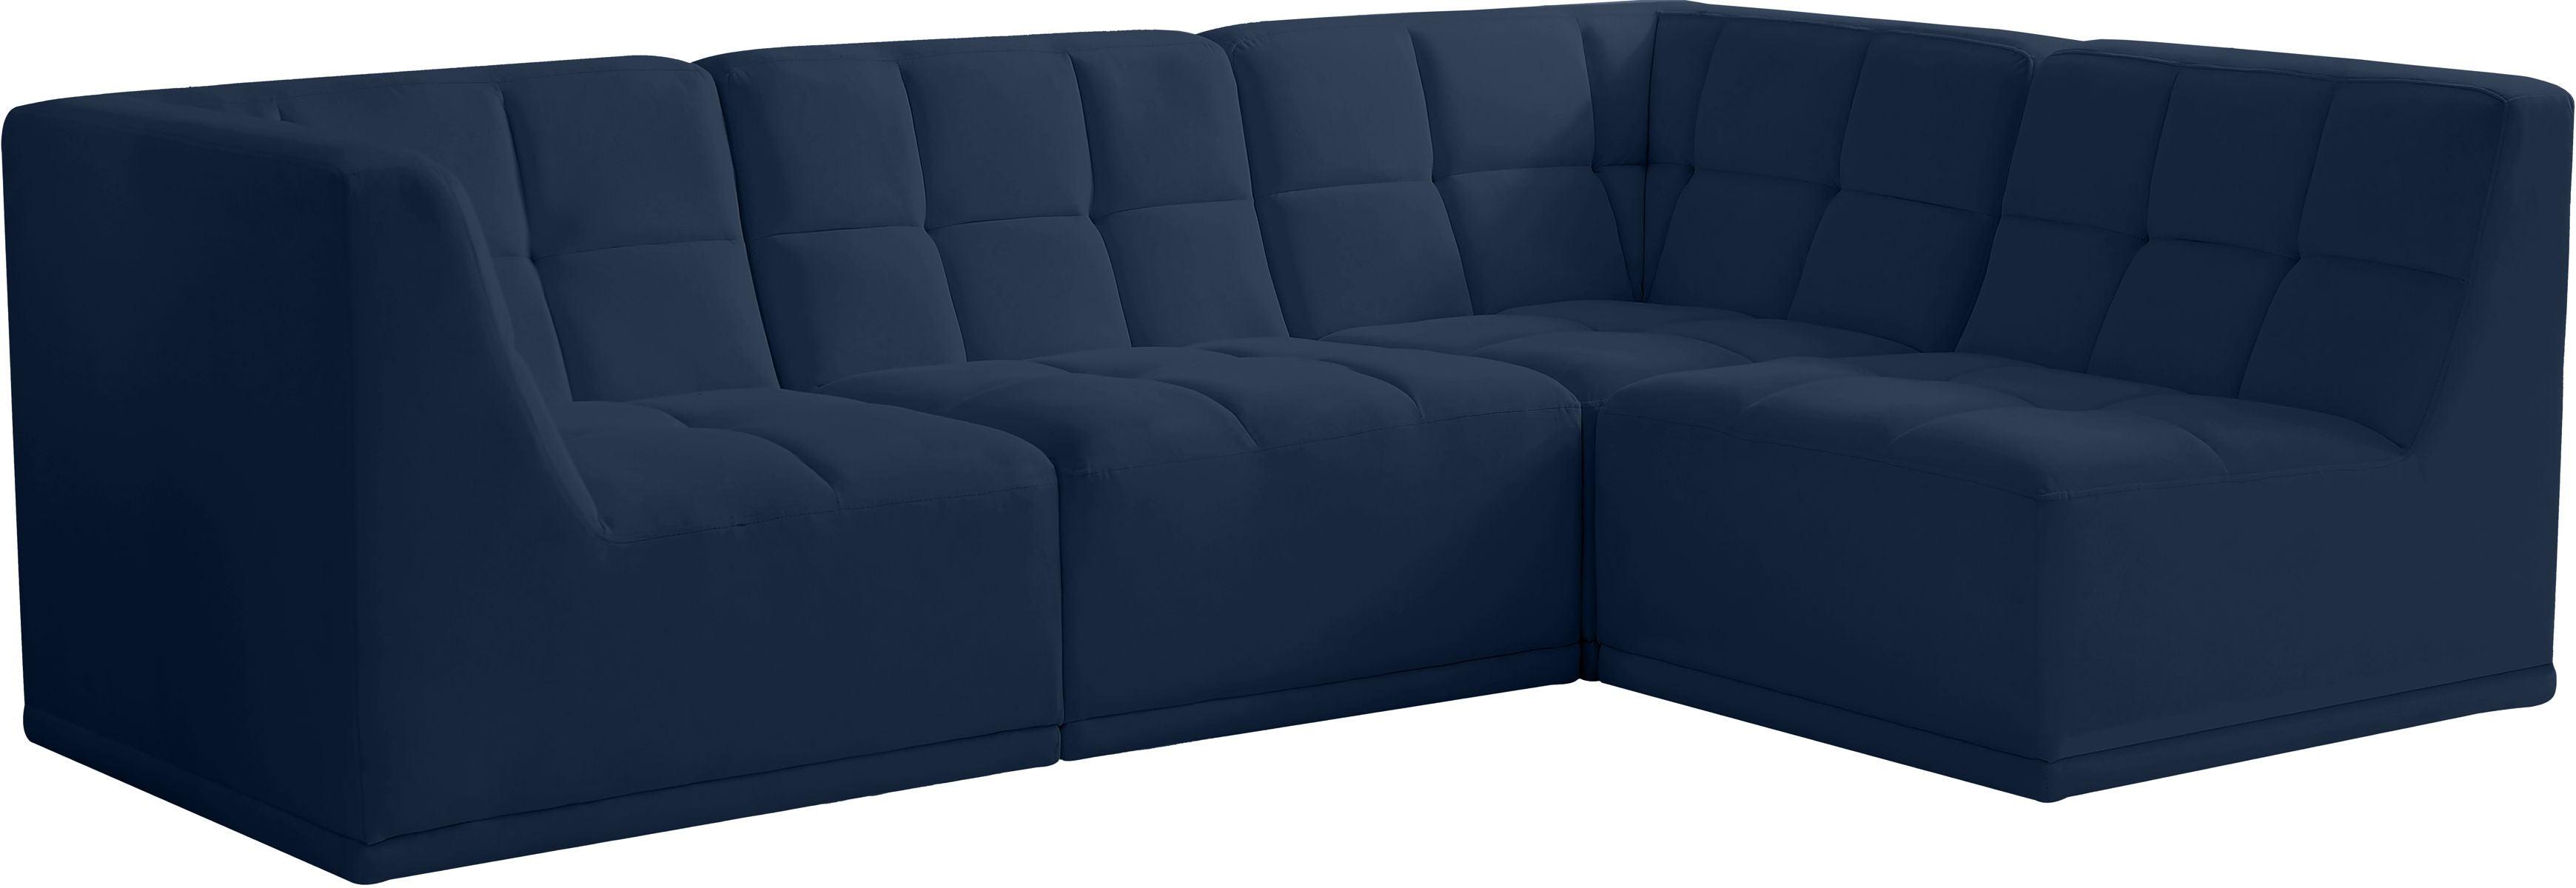 Meridian Furniture - Relax - Modular Sectional 4 Piece - Navy - 5th Avenue Furniture